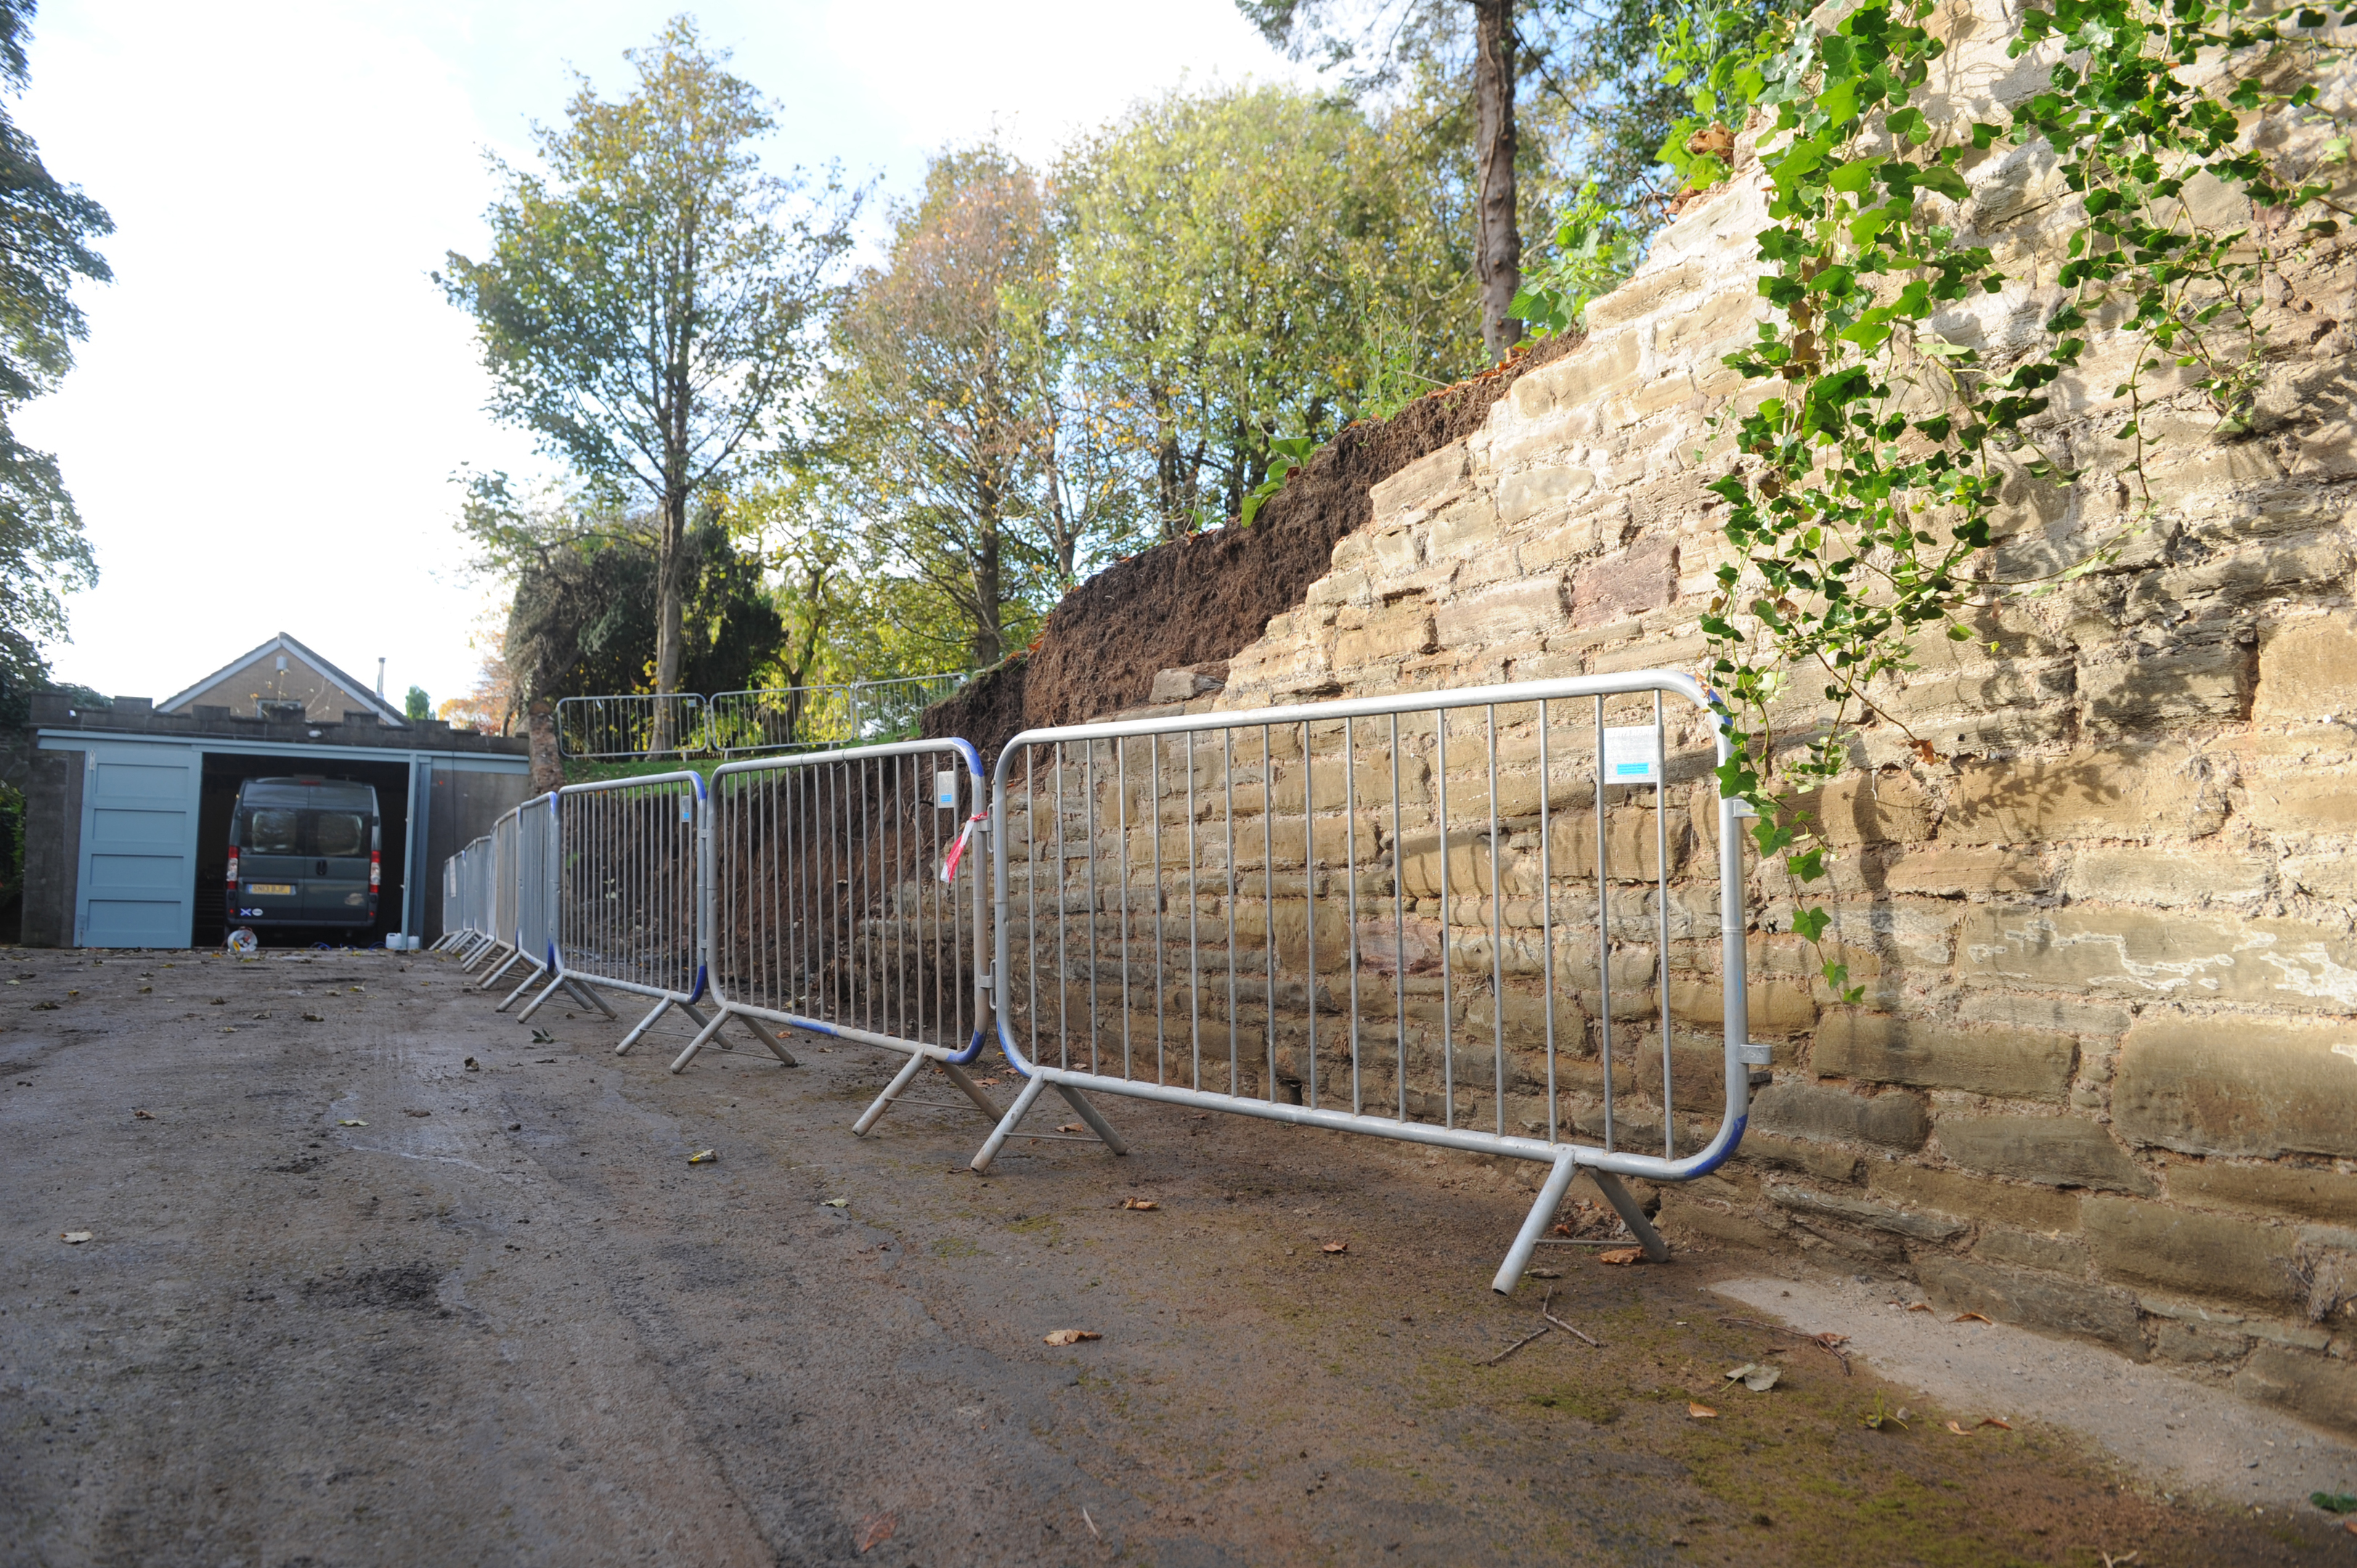 The site has been cleared and safety fences put in place.